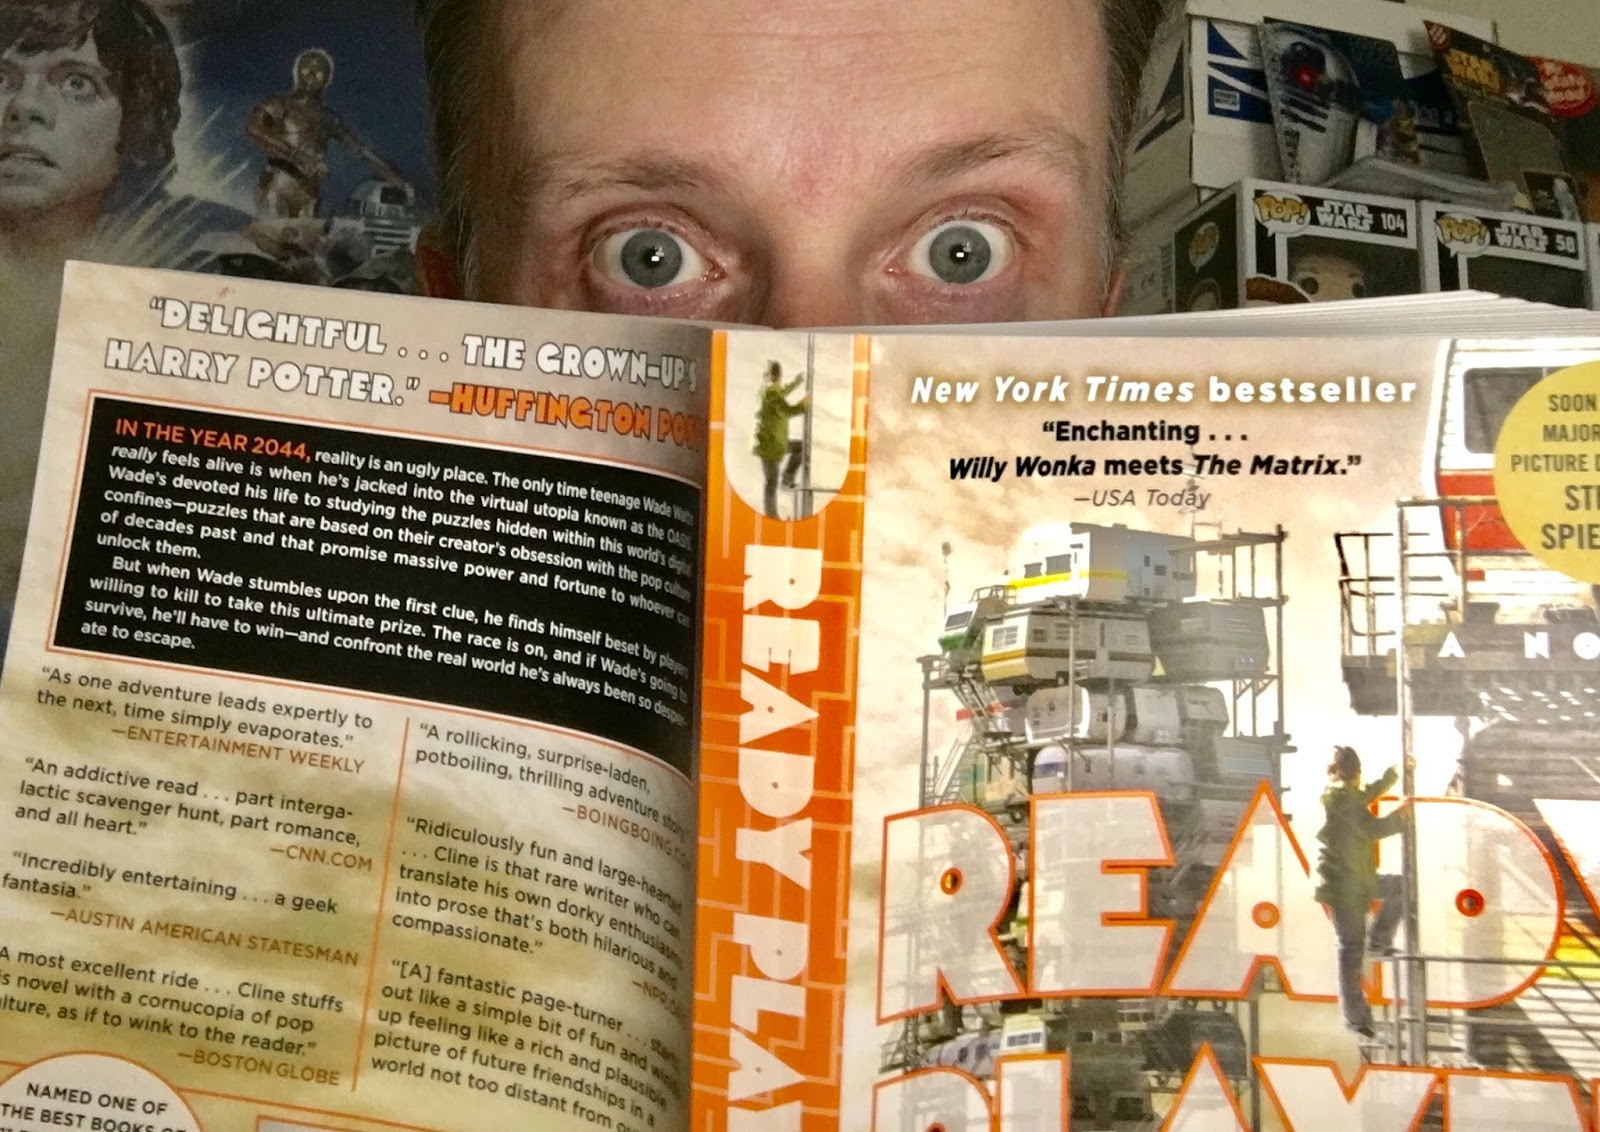 Ready Player One Ernest Cline Book Review